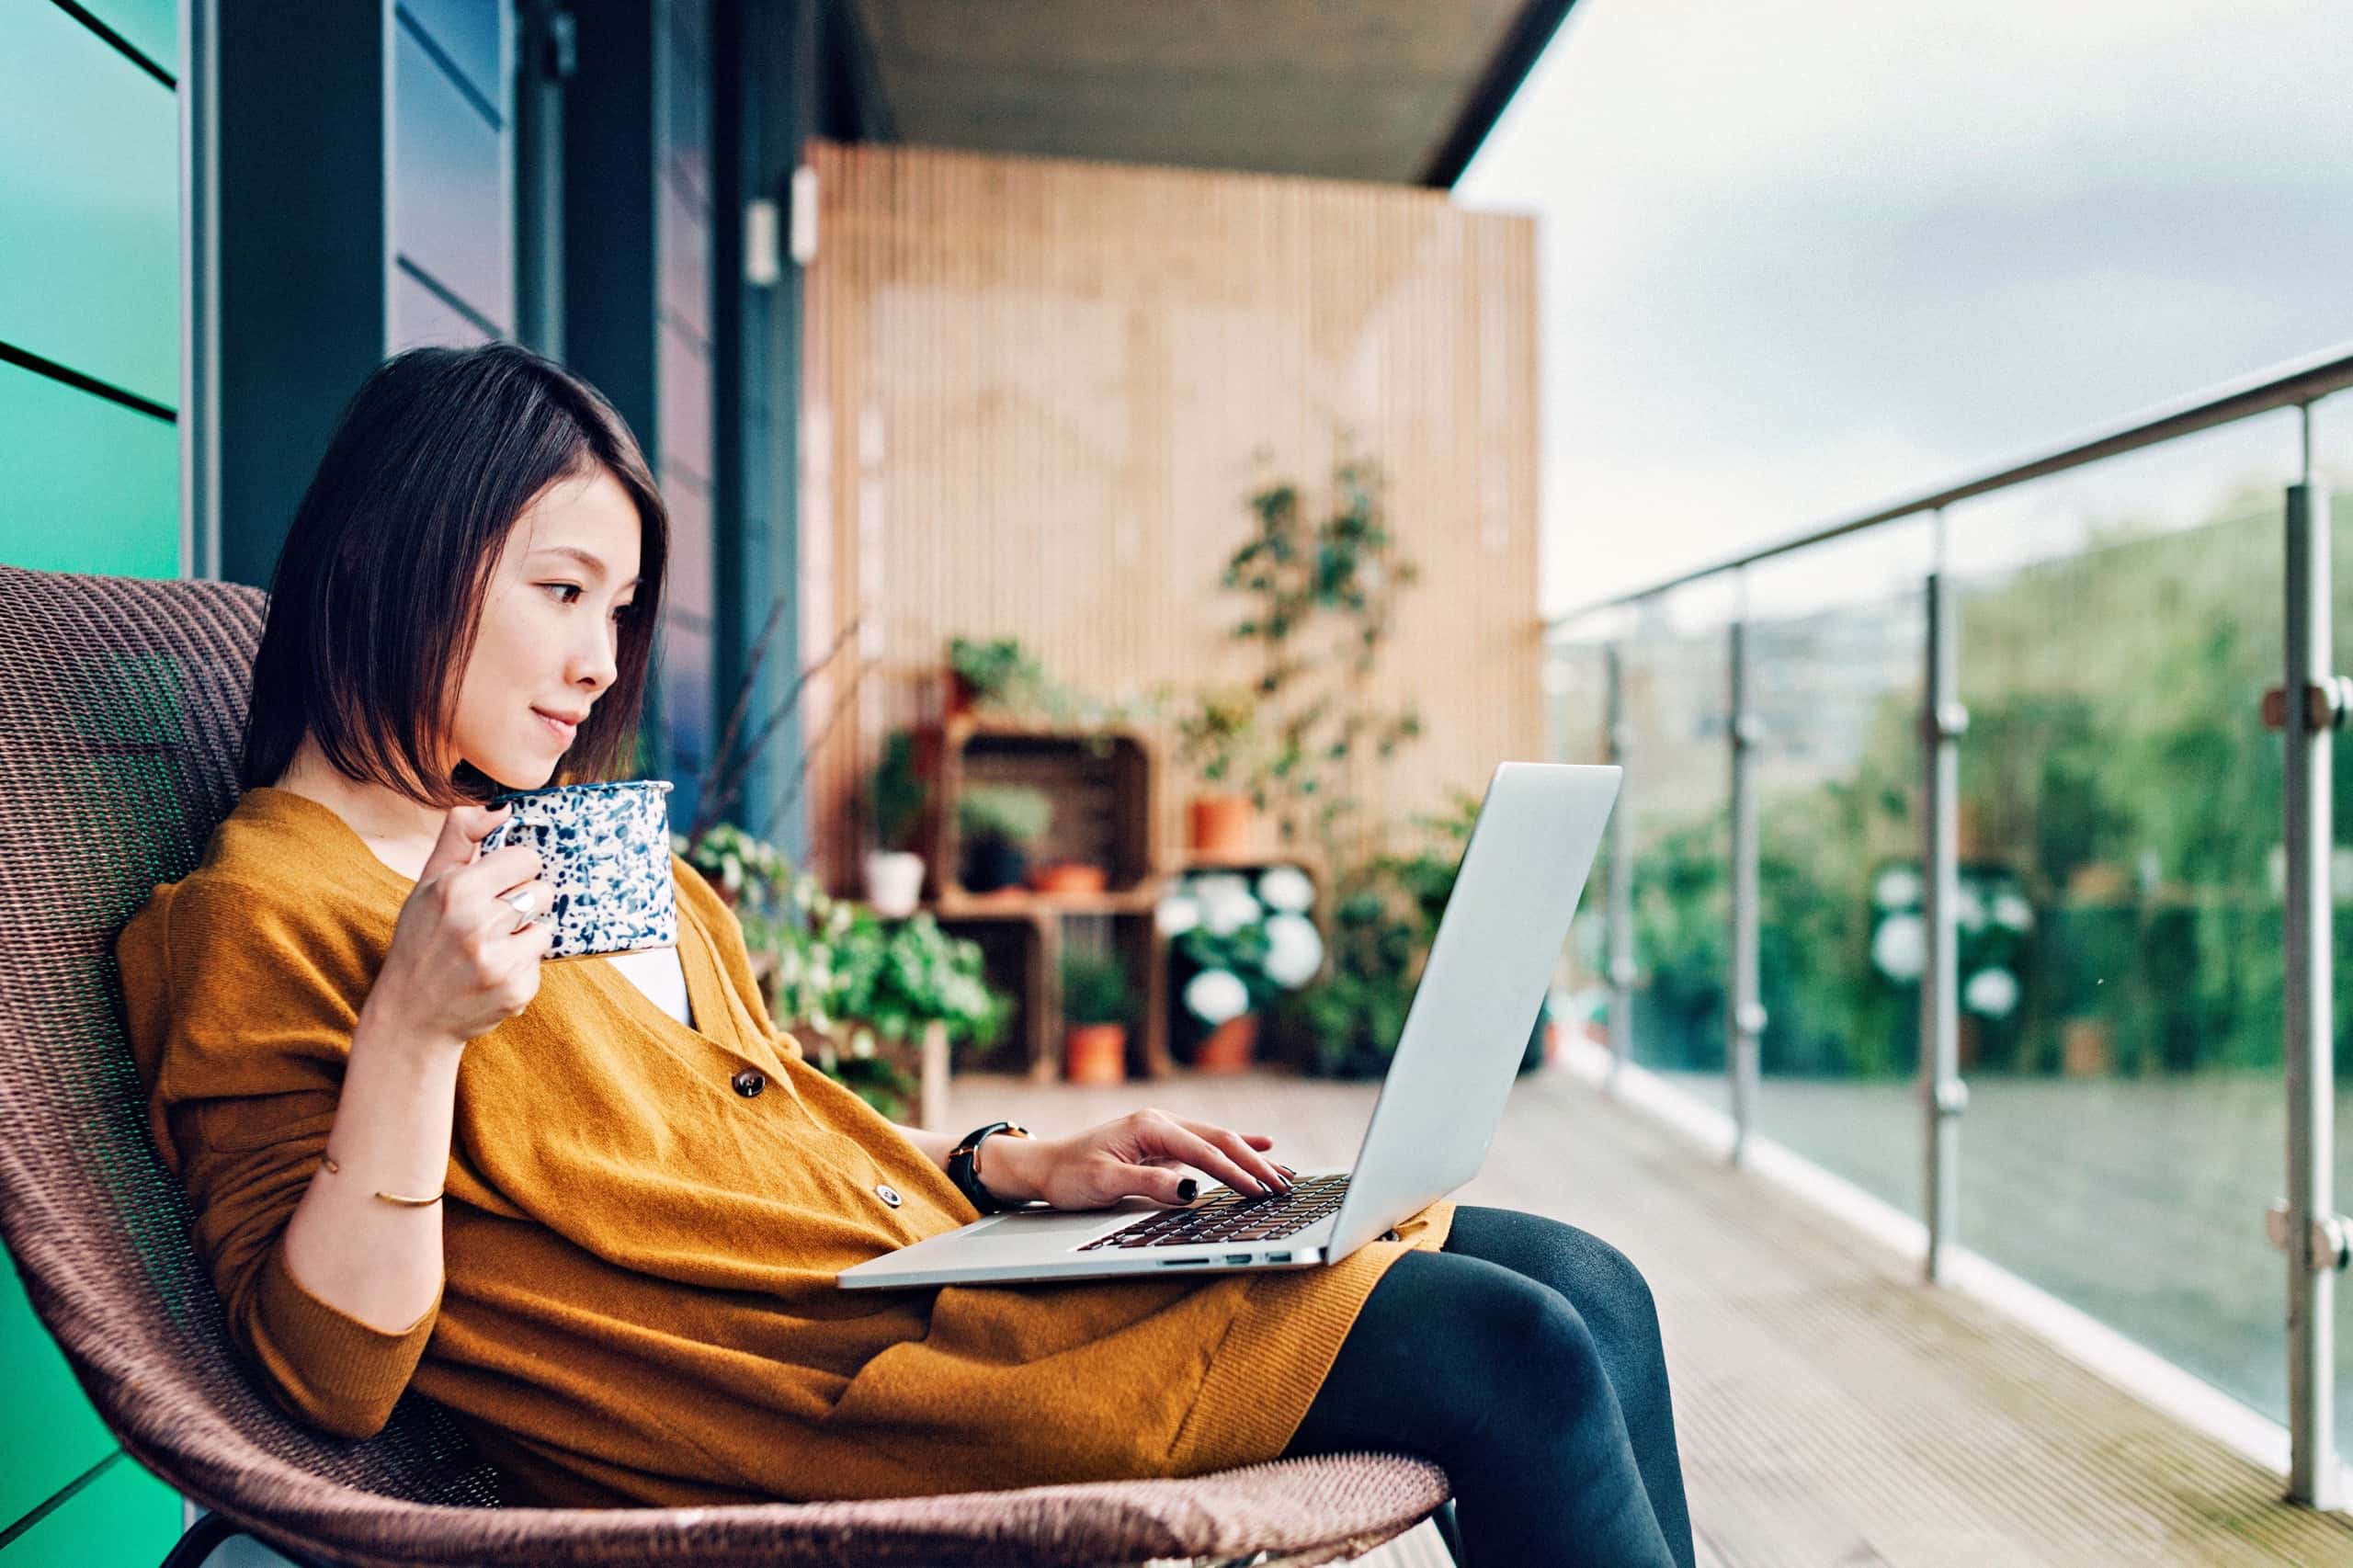 A woman working remotely on her laptop while enjoying a cup of coffee on her balcony, which relates to the text by illustrating the concept of secure remote wor